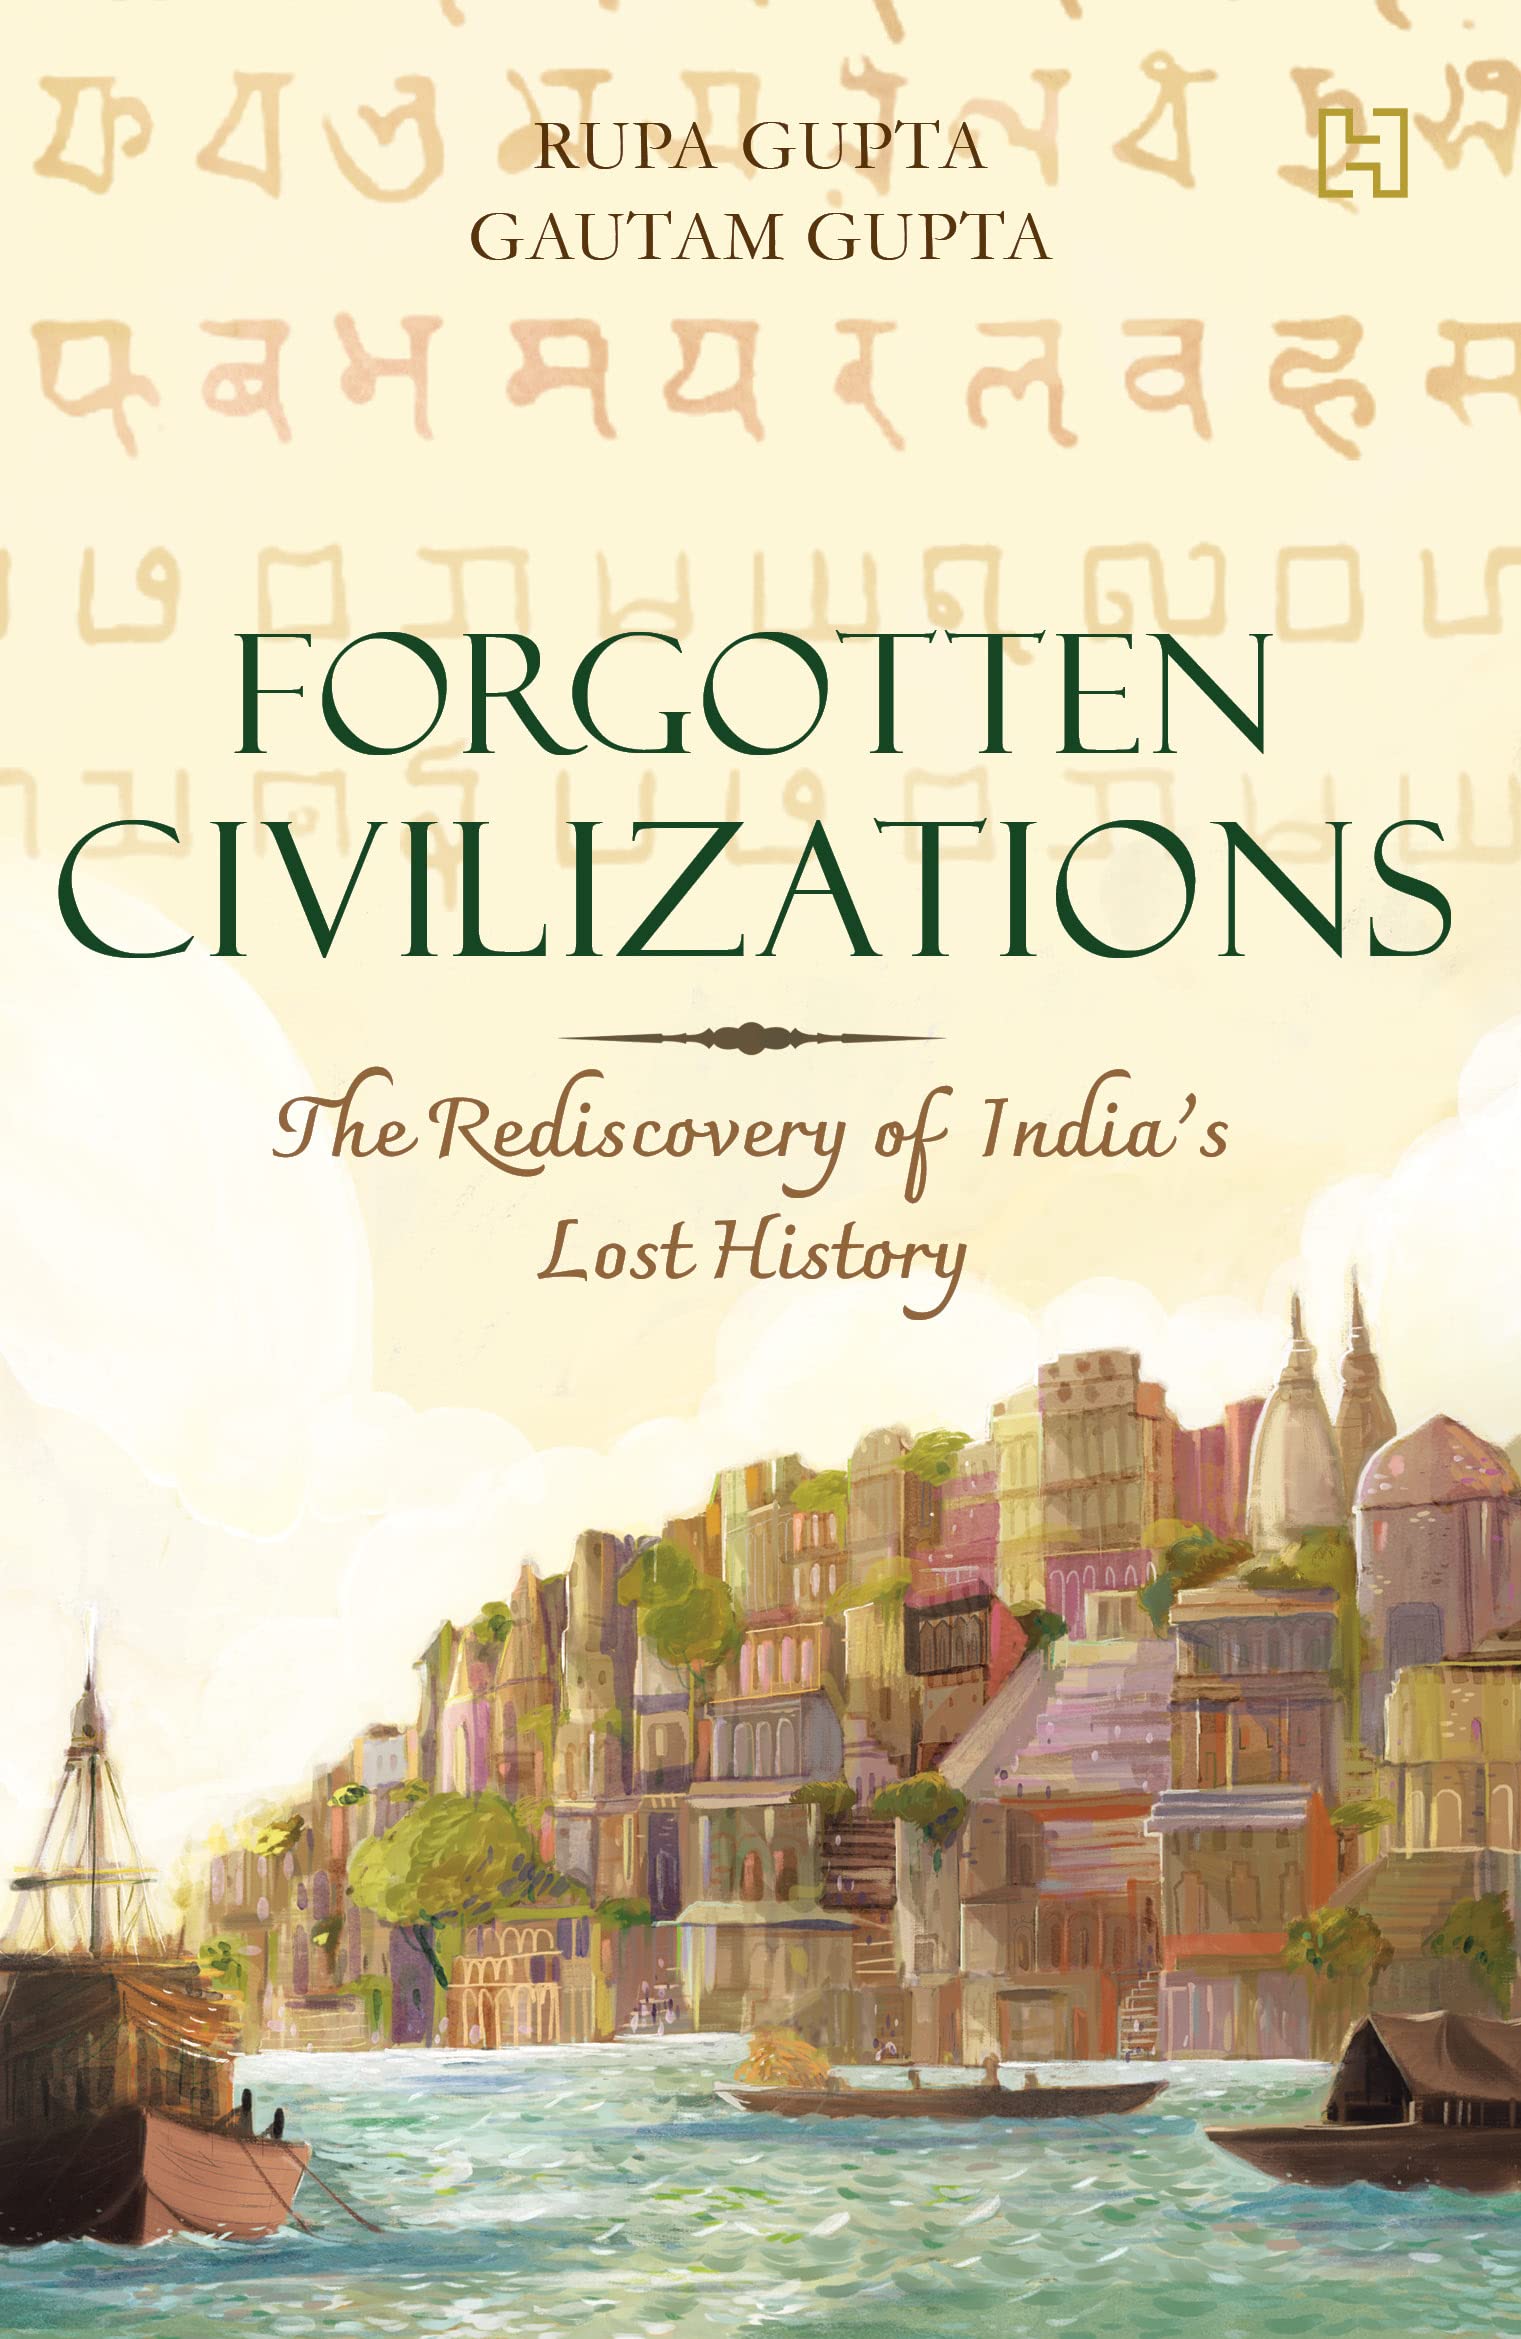 Discoverers of India